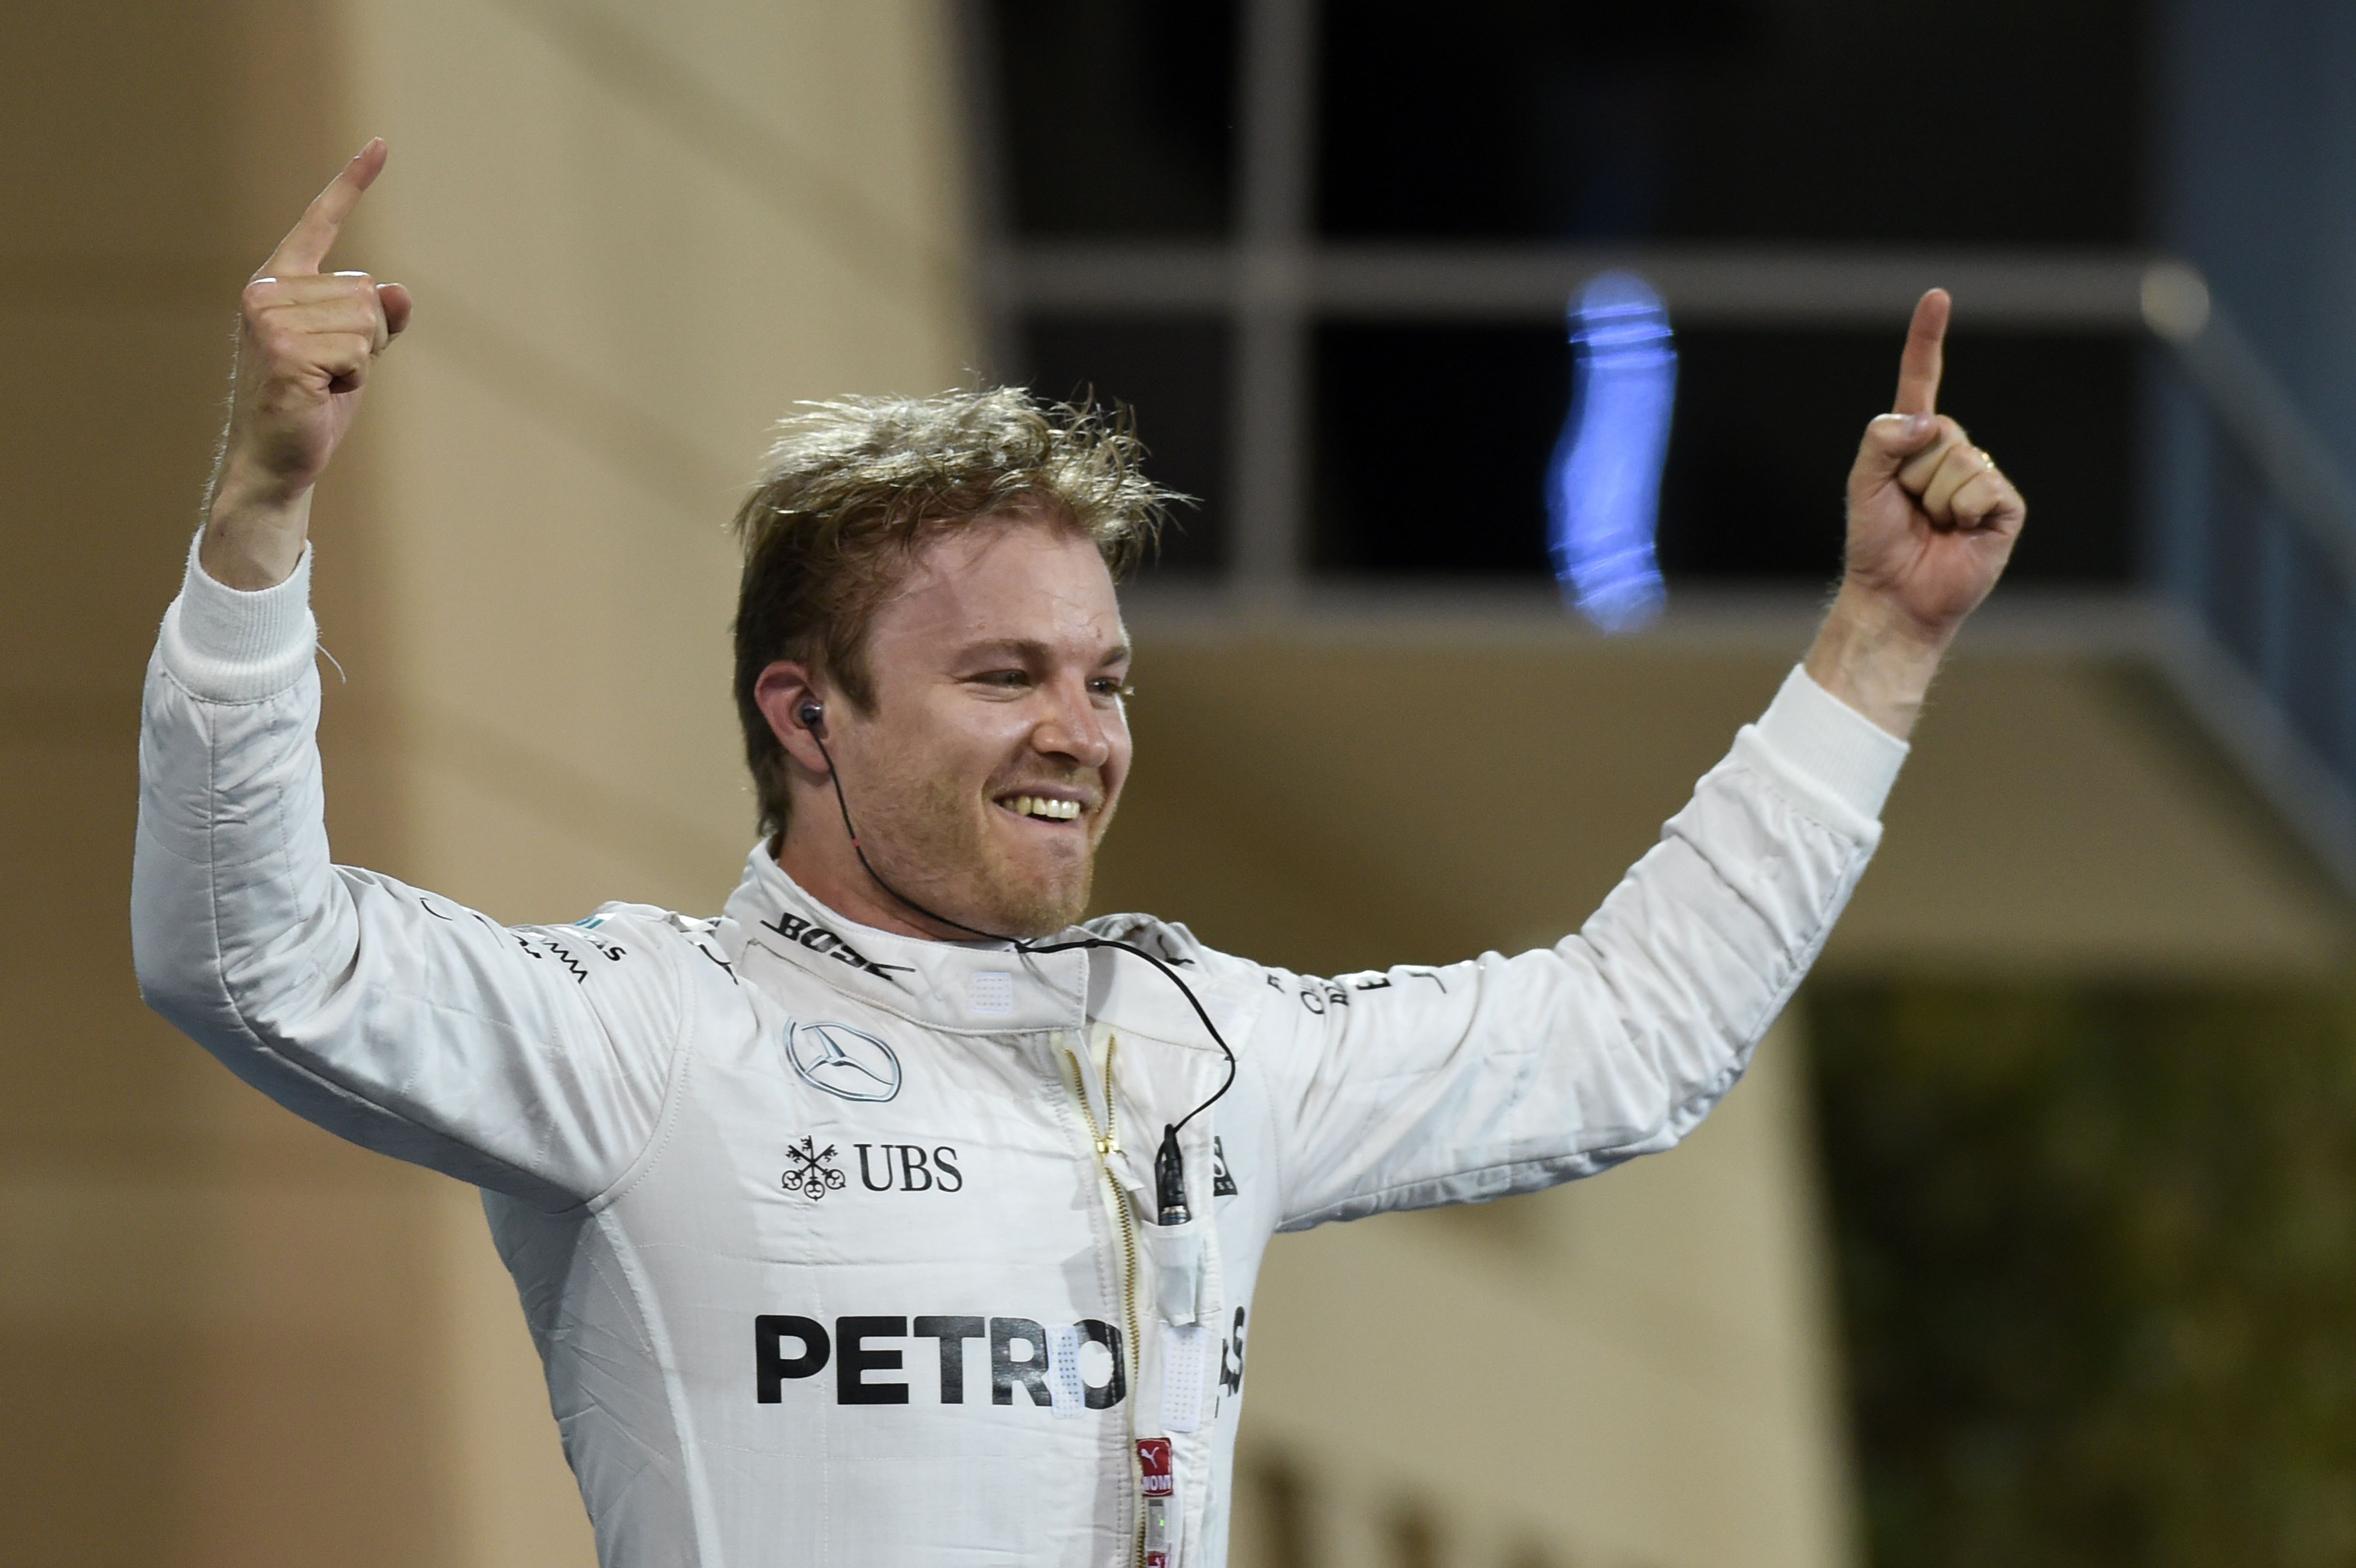 Rosberg romps to fifth win in a row